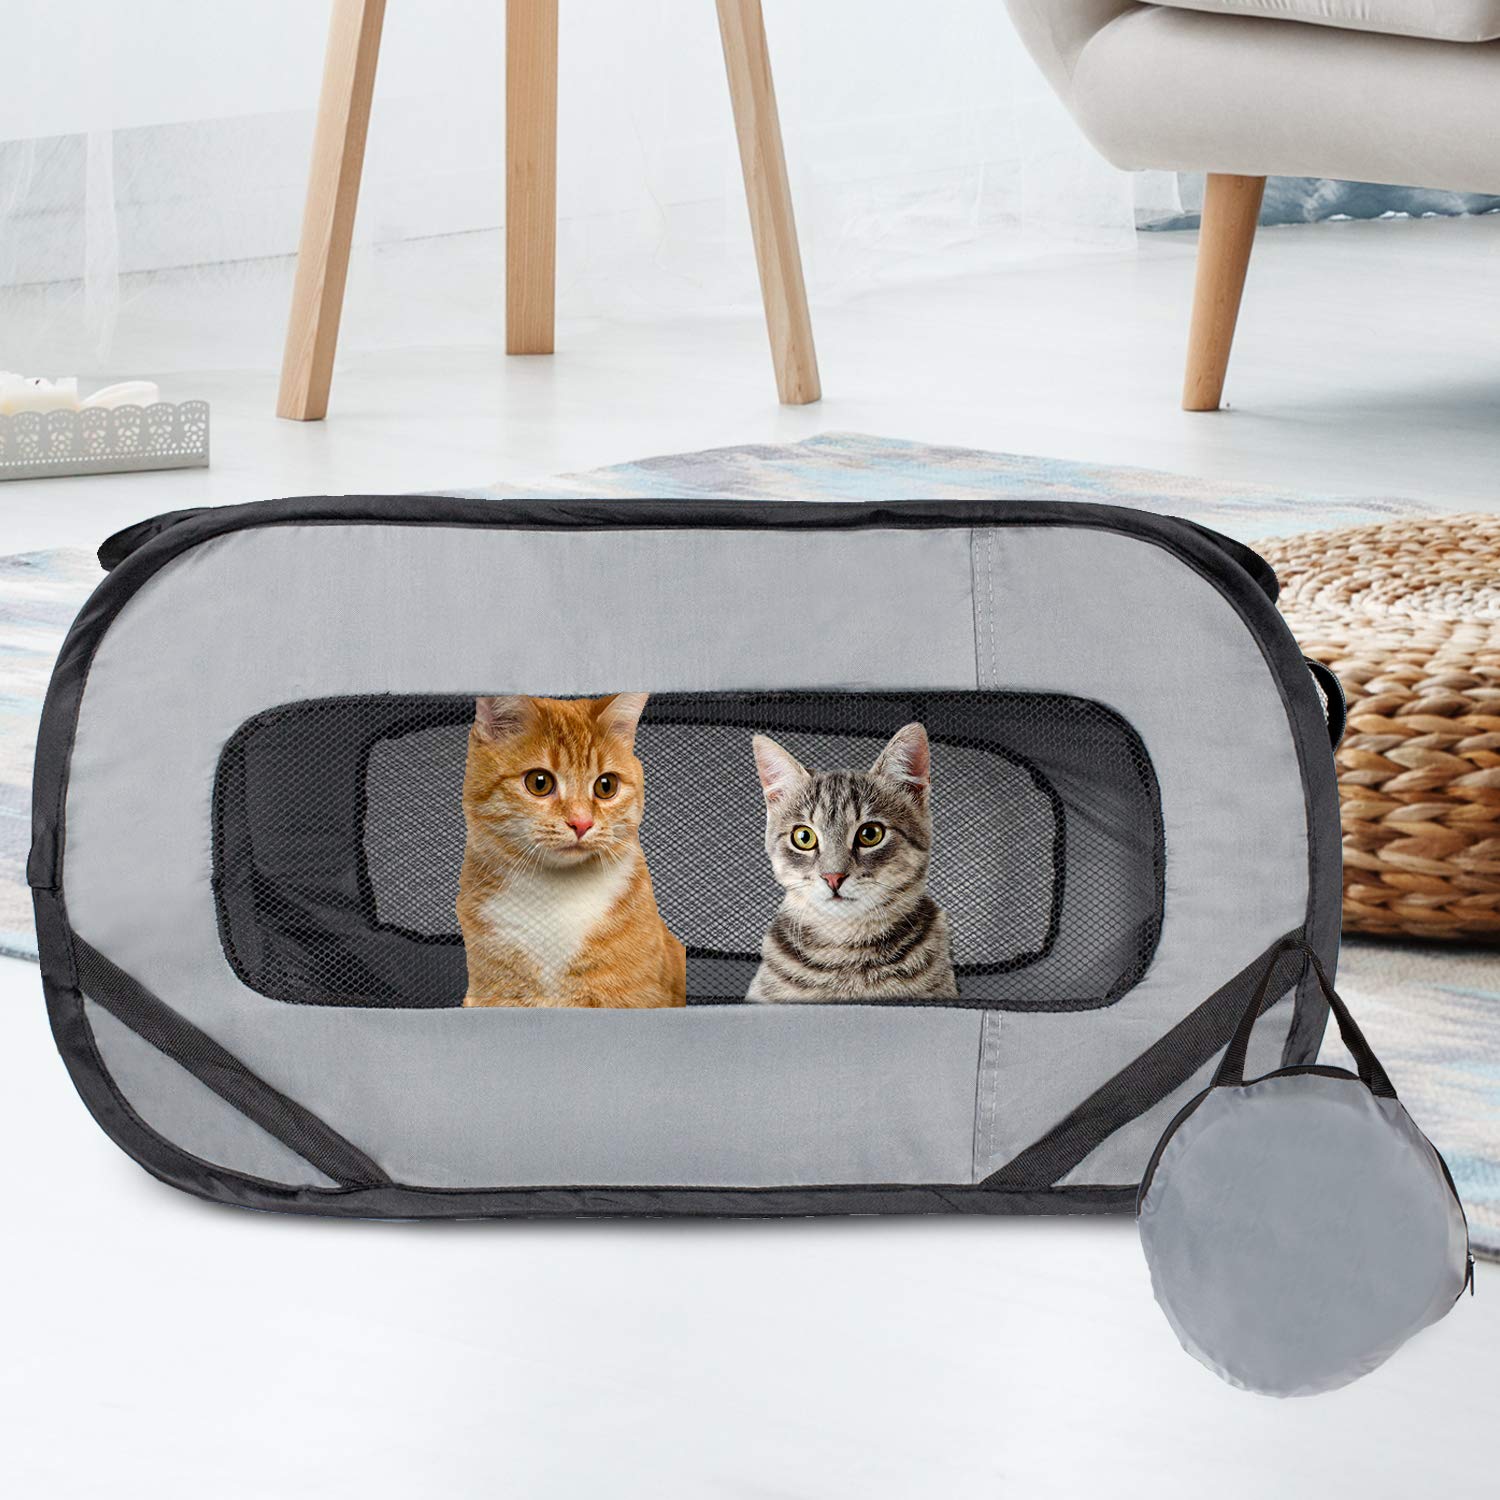 Puppy Playpen & Poop-Up Cat Tent - Pet Playpen for Dogs or Downtown Pet  Supply - Foldable Cat Crate - with Straps for Cat Car Seat Standard